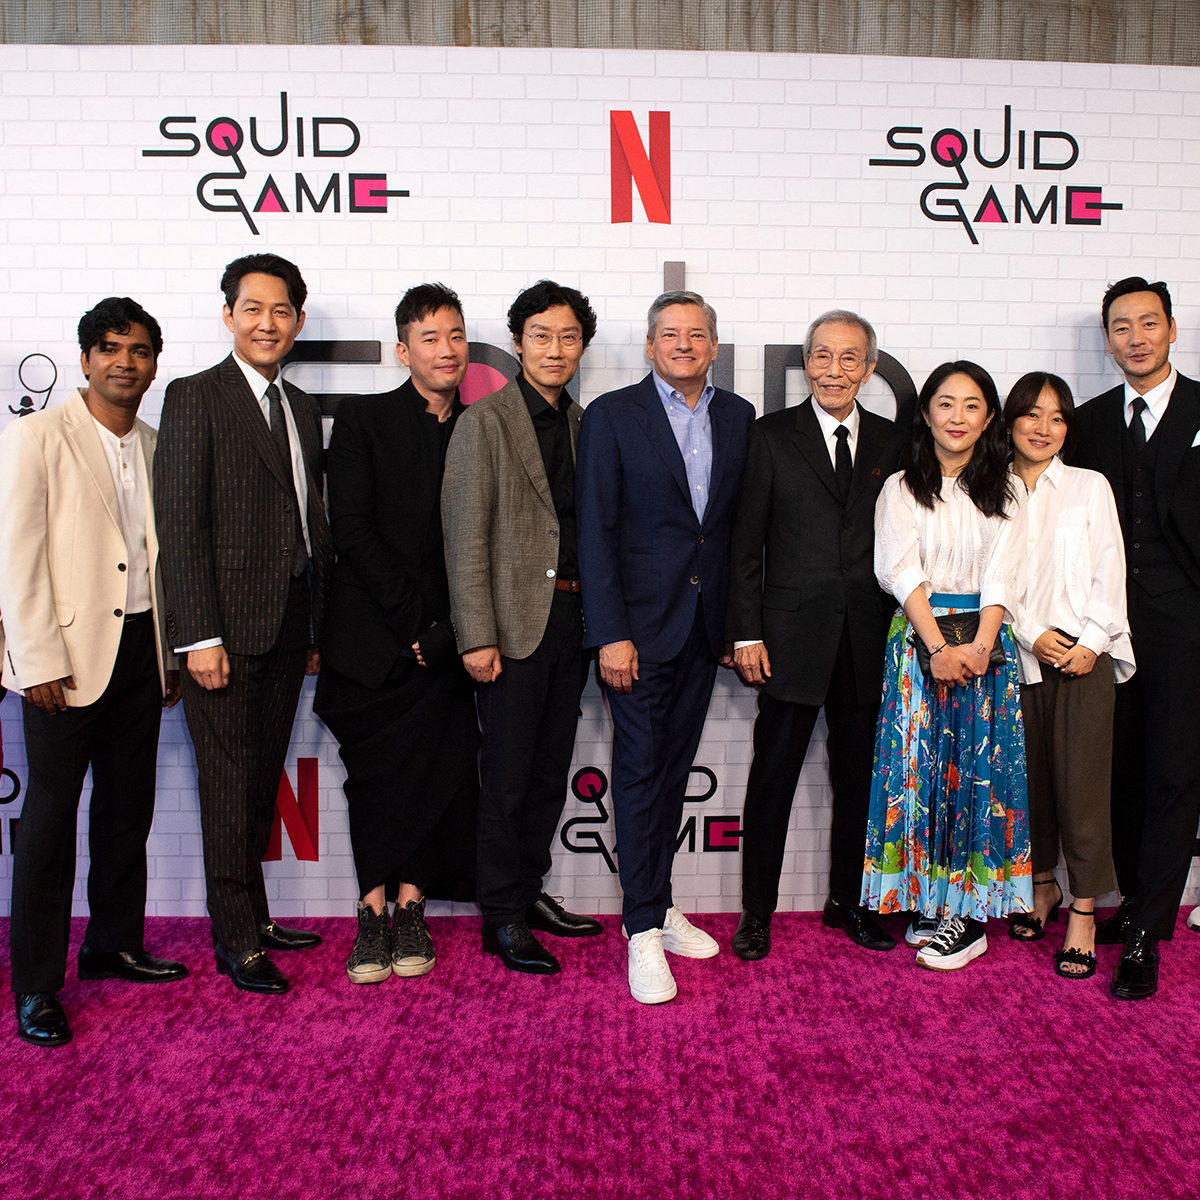 Squid Game season 2, Release date speculation, cast news and plot